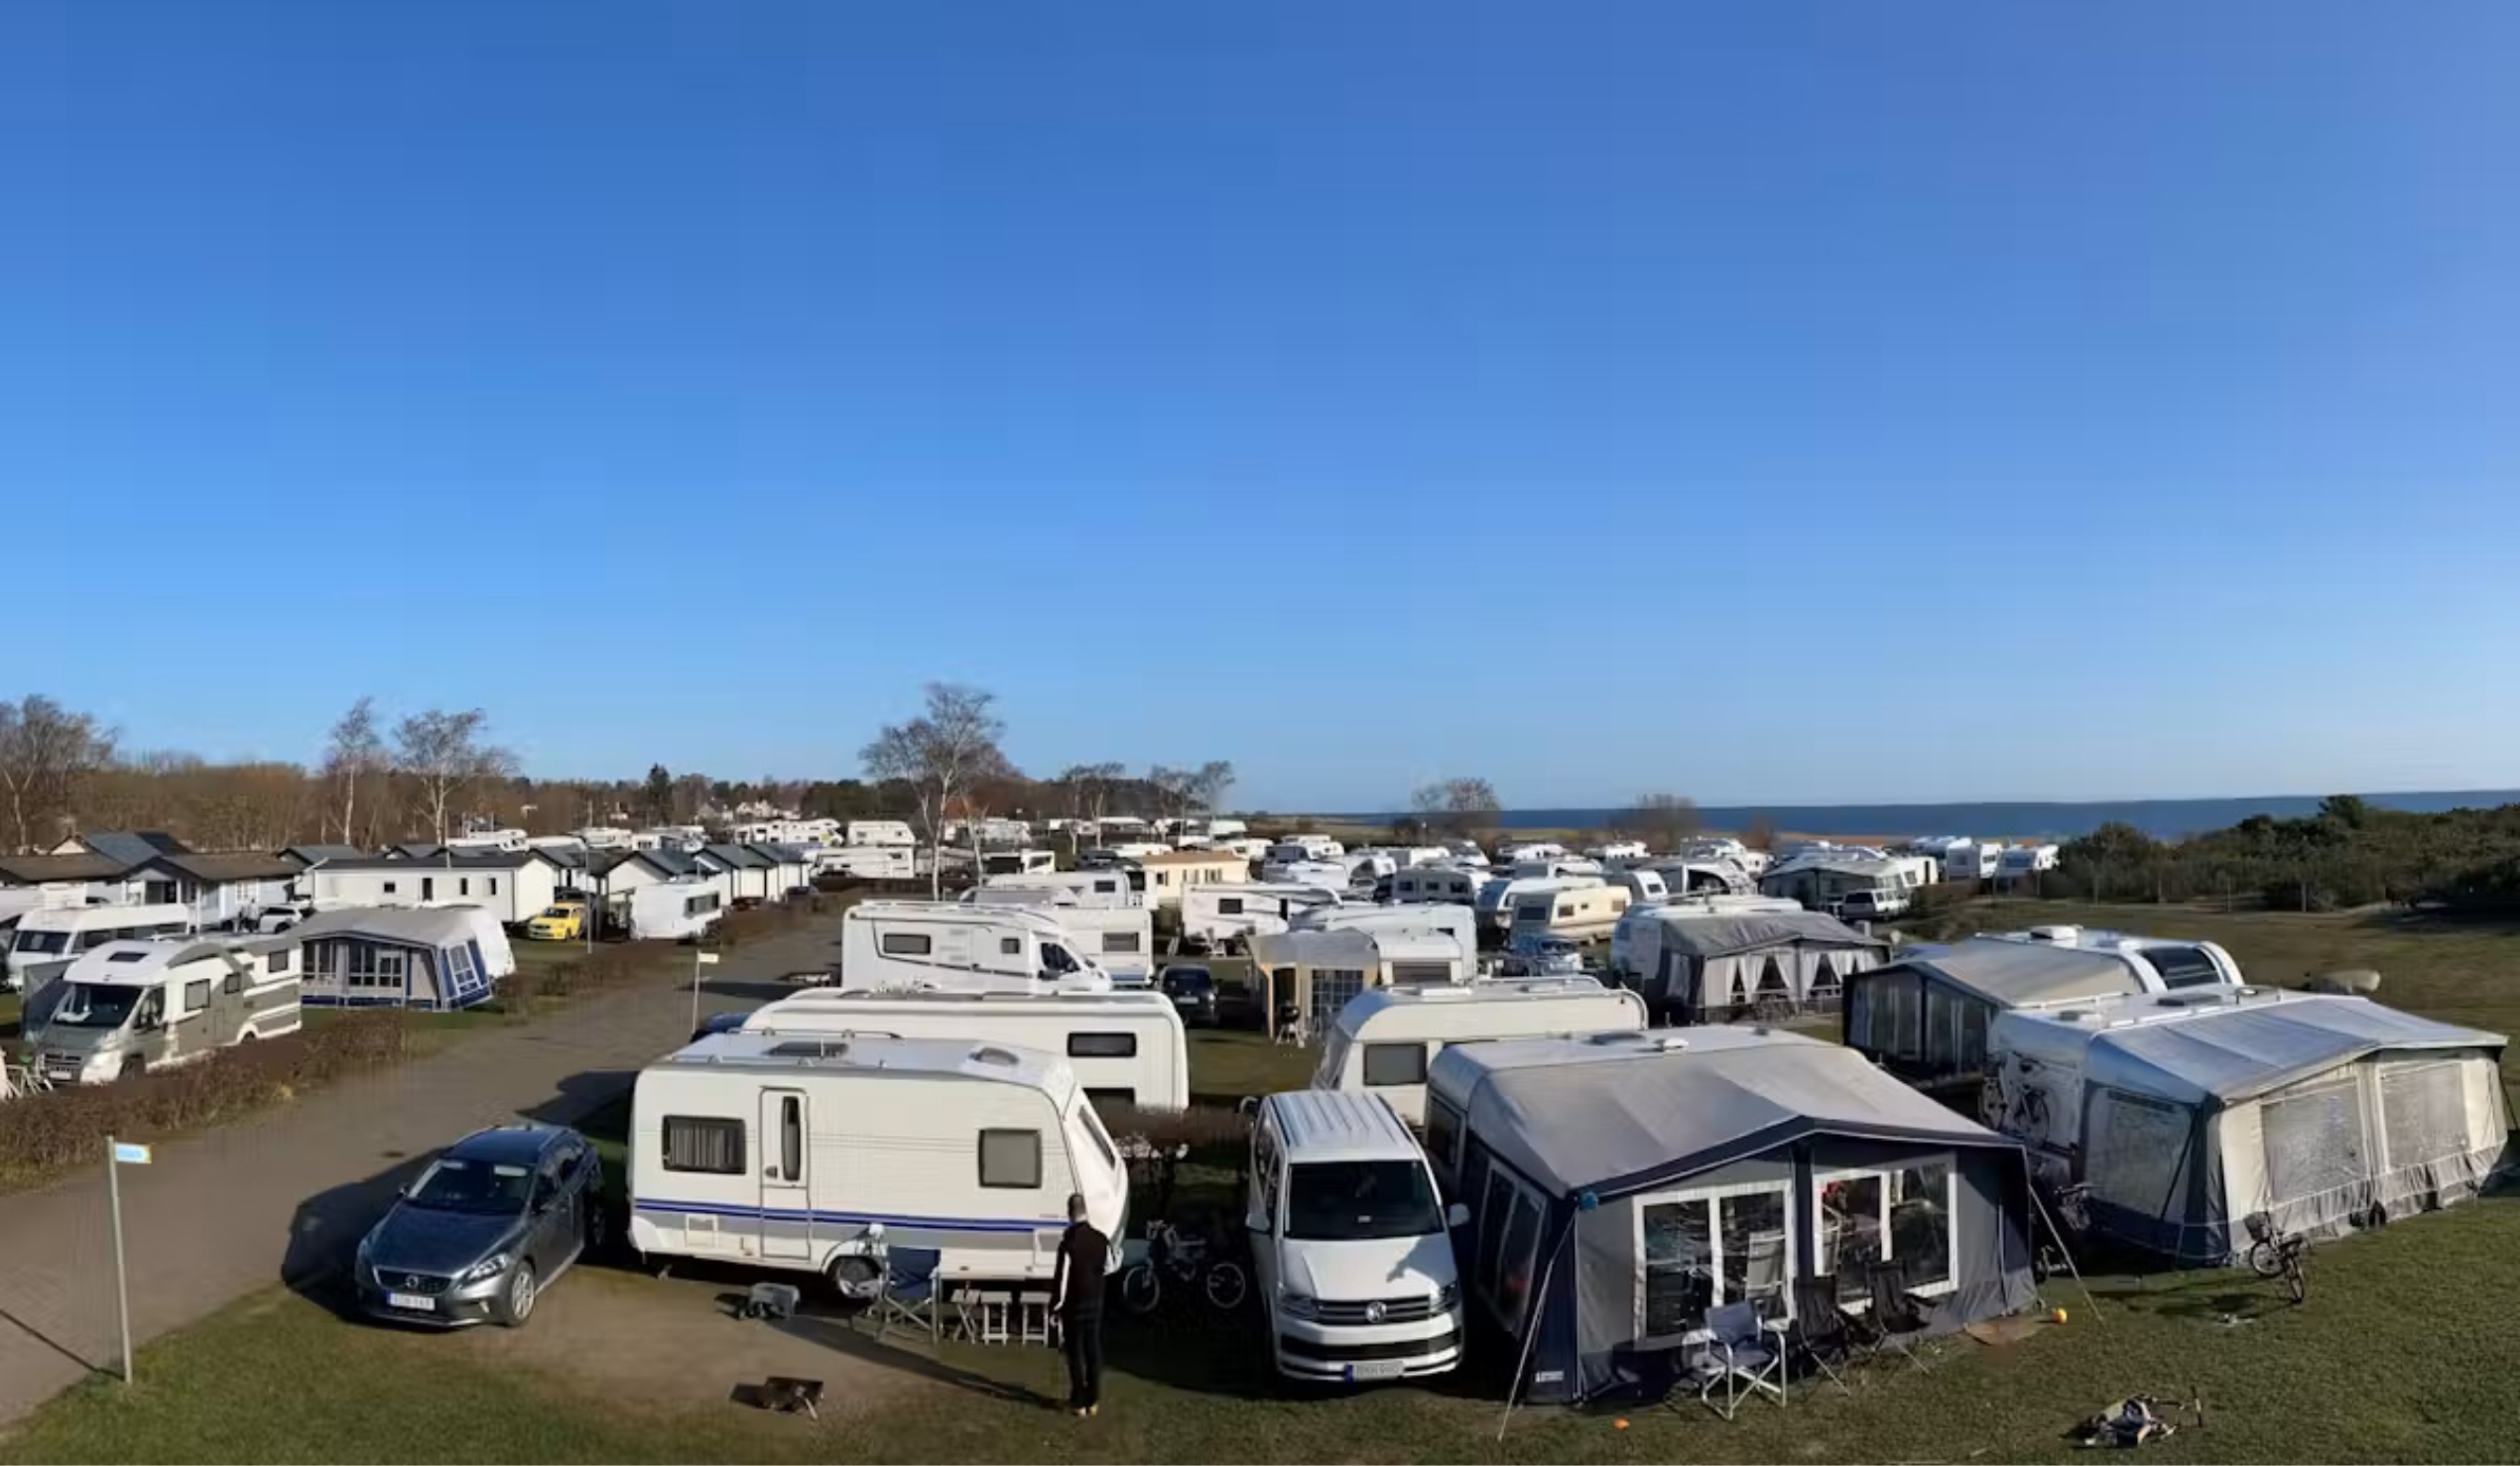 Tobisviks Camping is beautifully located by the sea. Copyright: Pincamp.de